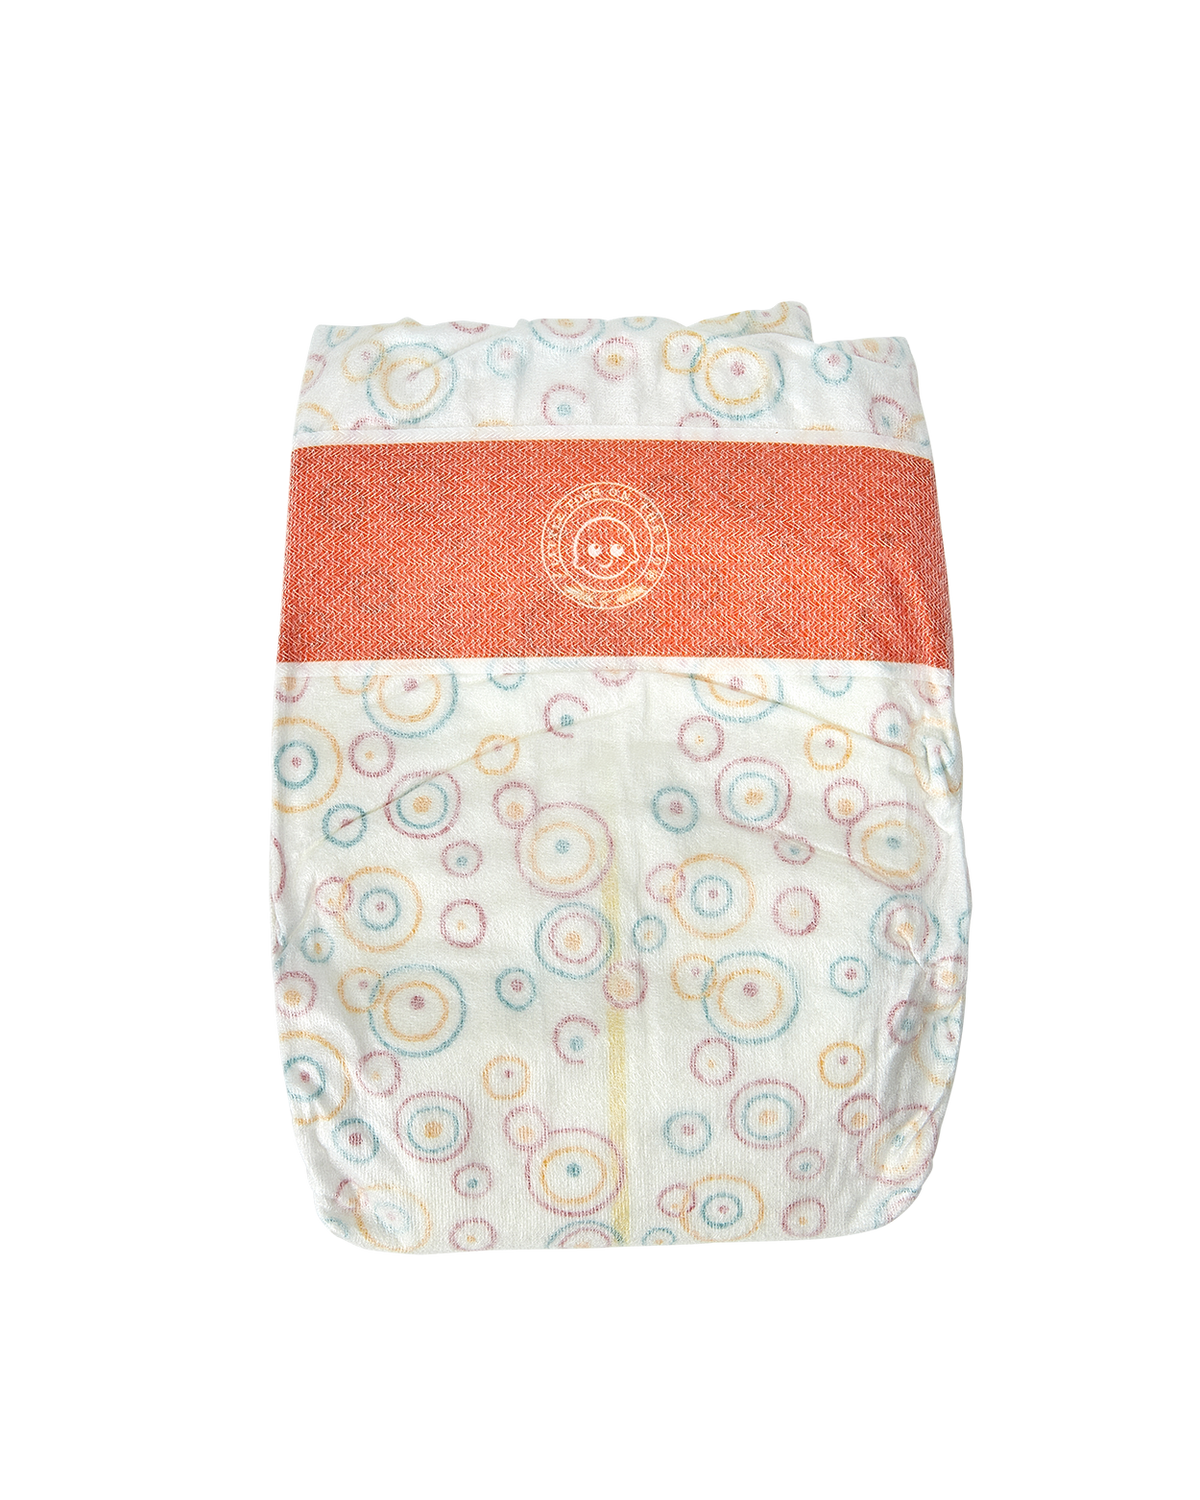 Little Toes Disposable Biodegradable Bamboo Diapers - 36 Pack Size Newborn, Small, Medium and Large